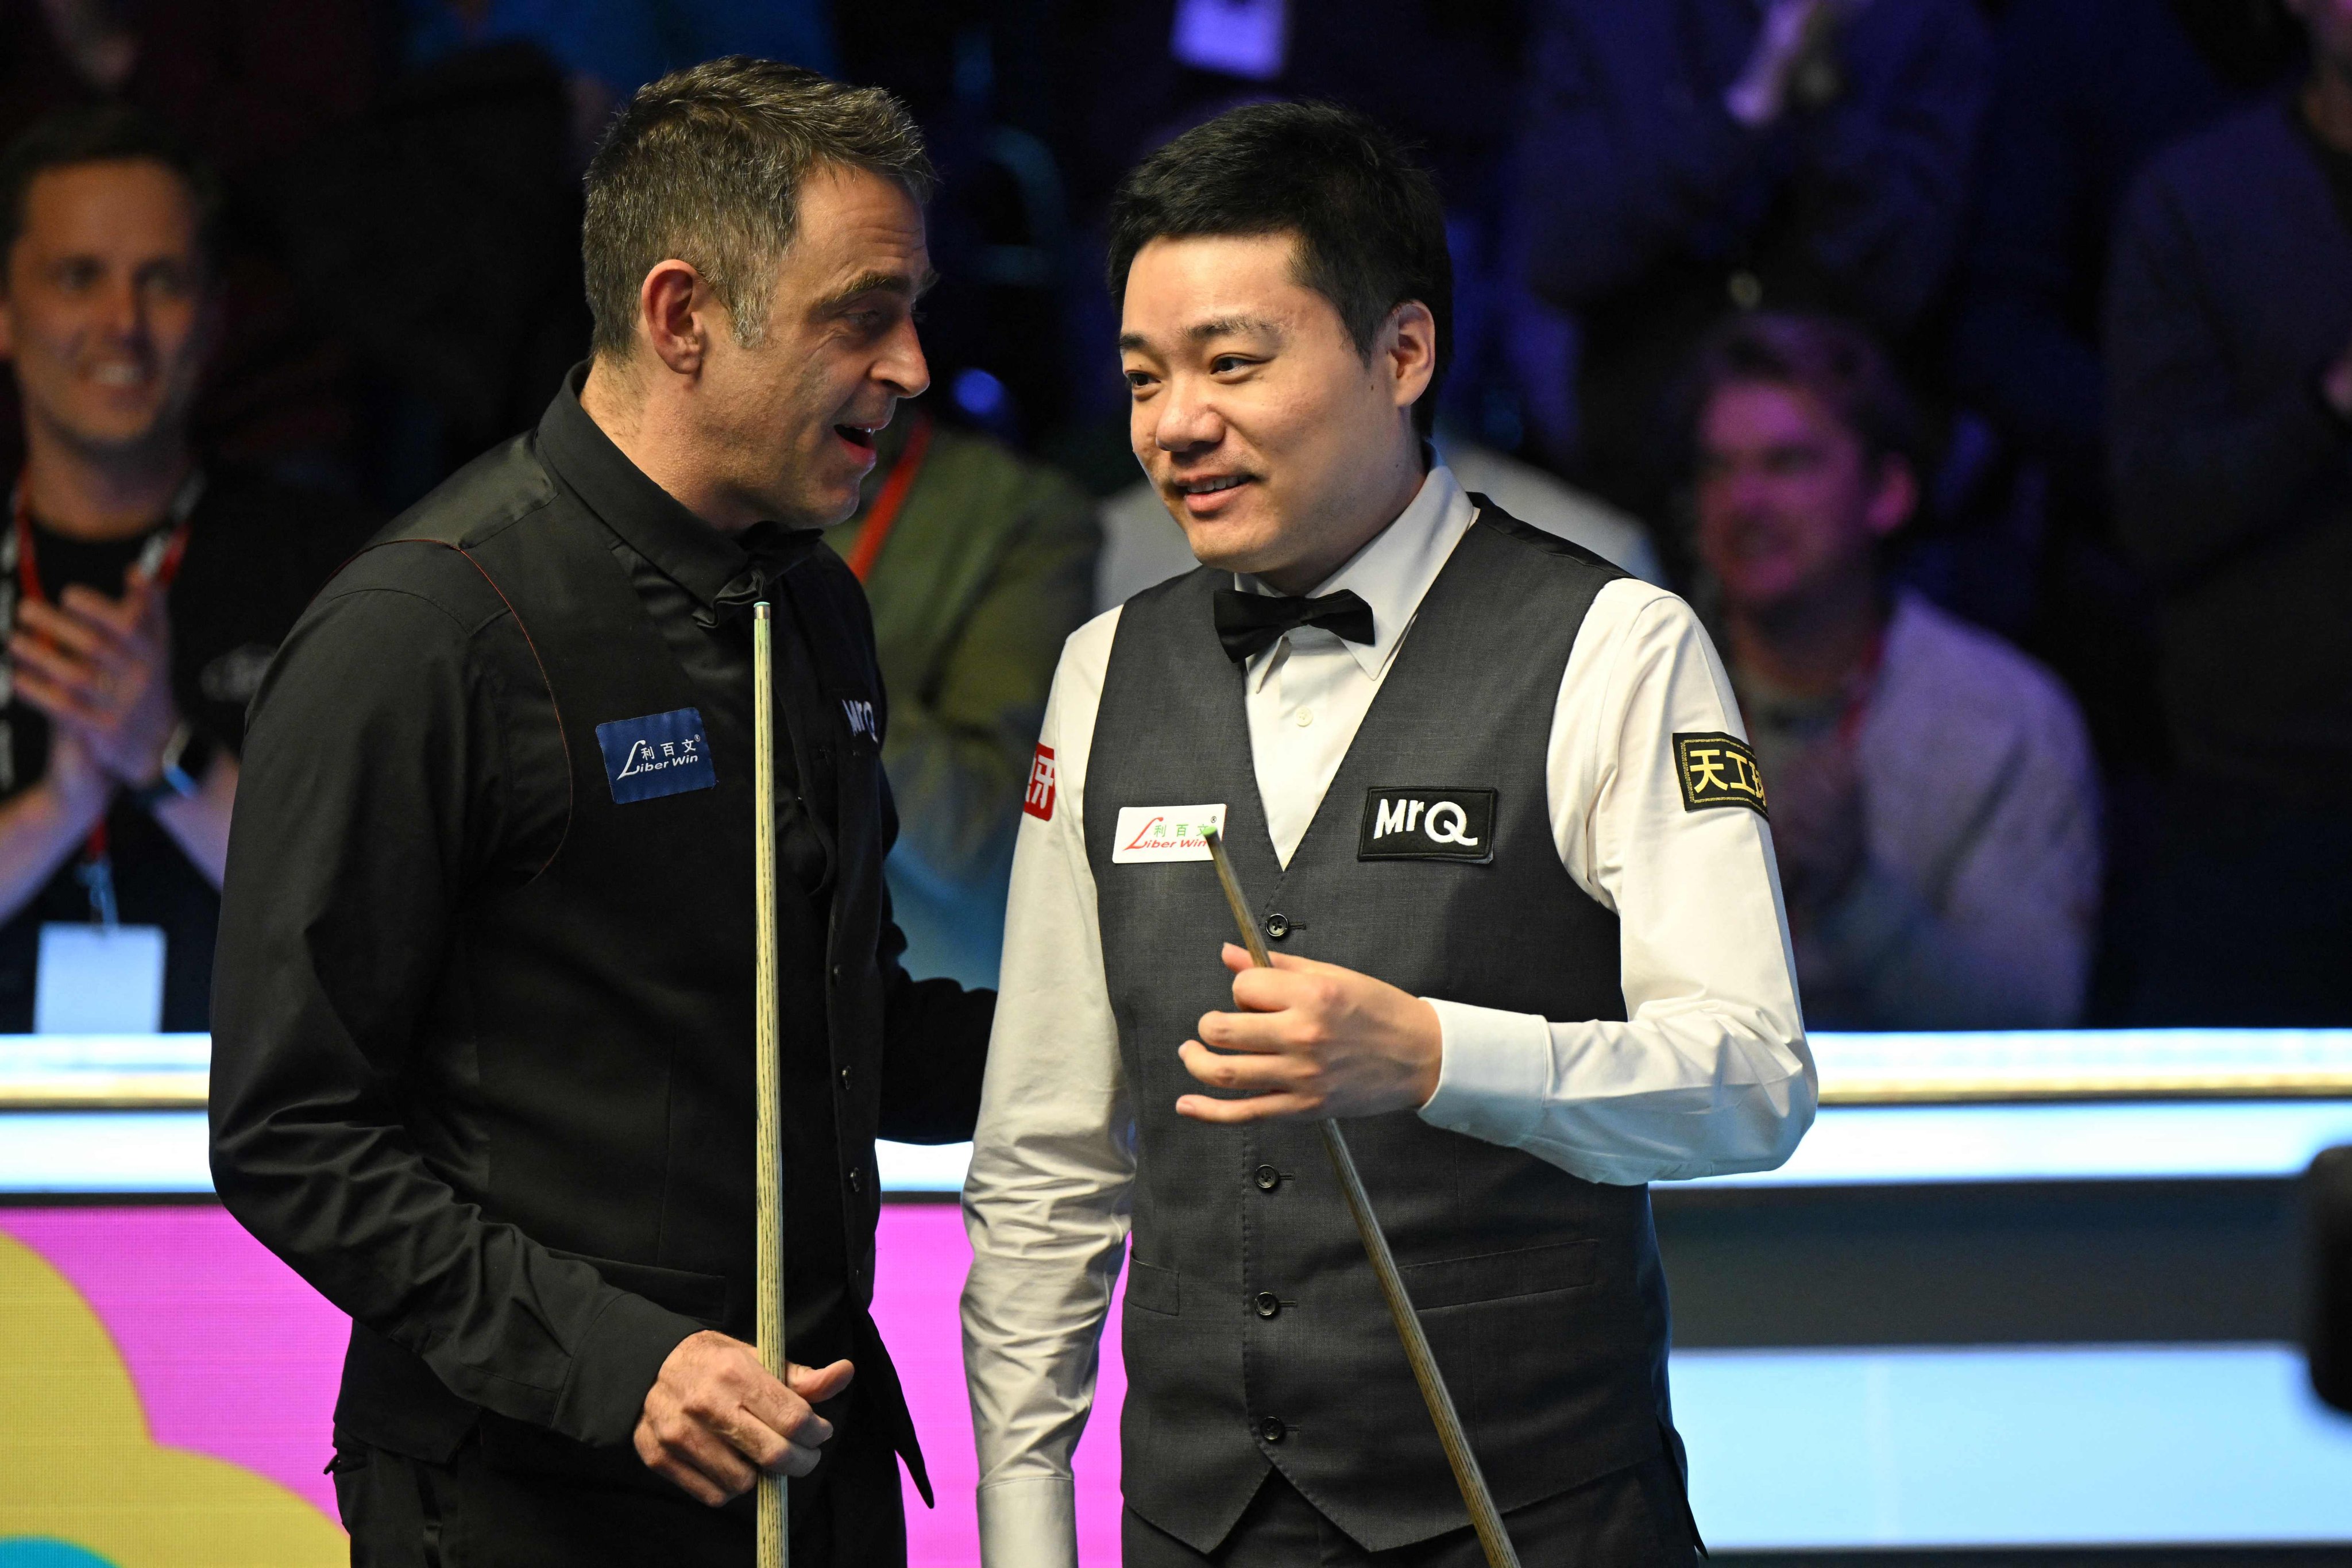 Ronnie O’Sullivan (left) consoles Ding Junhui after beating him in the UK final in York. Photo: AFP